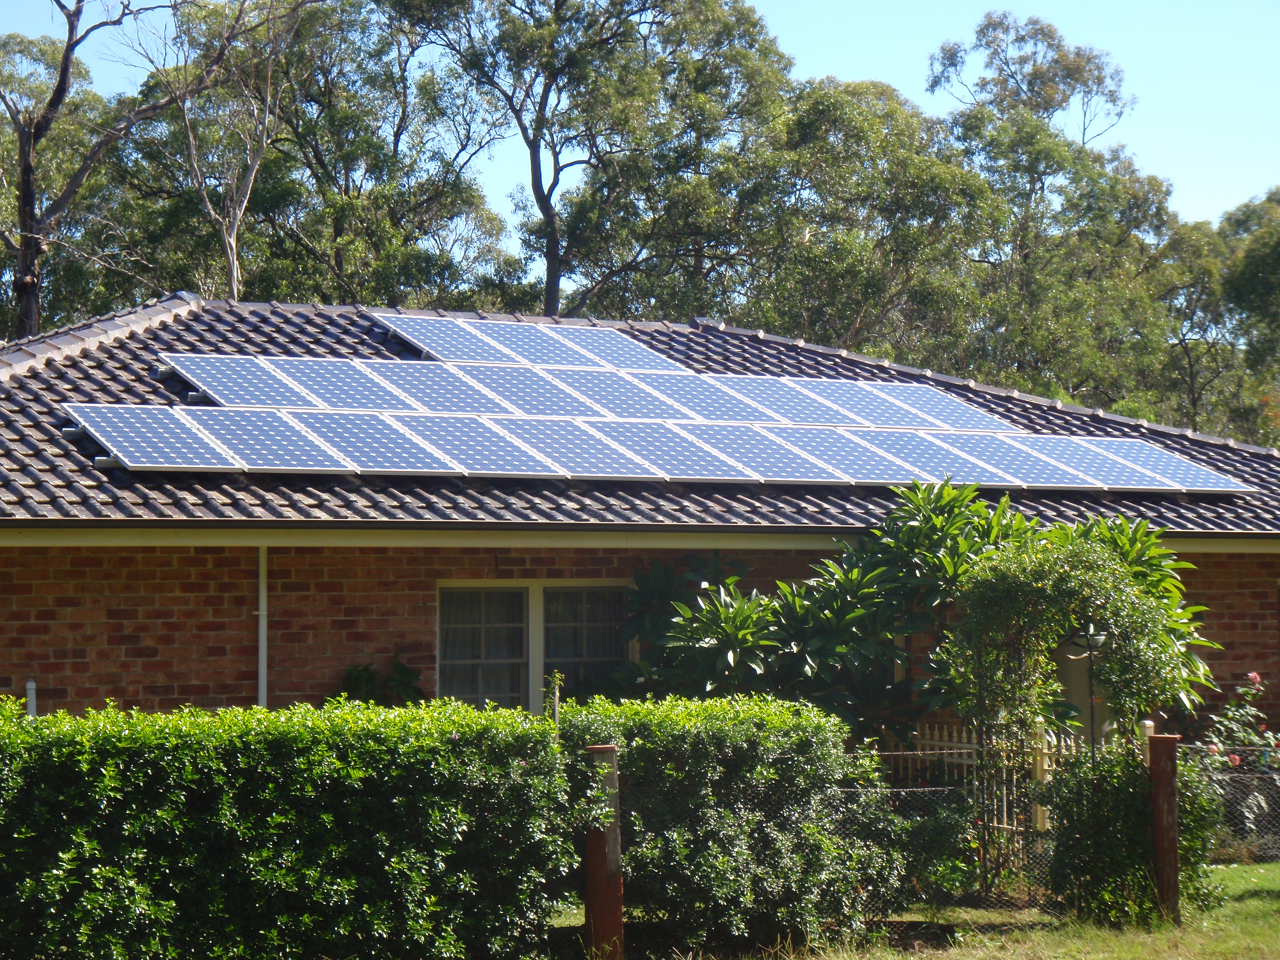 How Much Are Solar Panels Cost? â HomesFeed